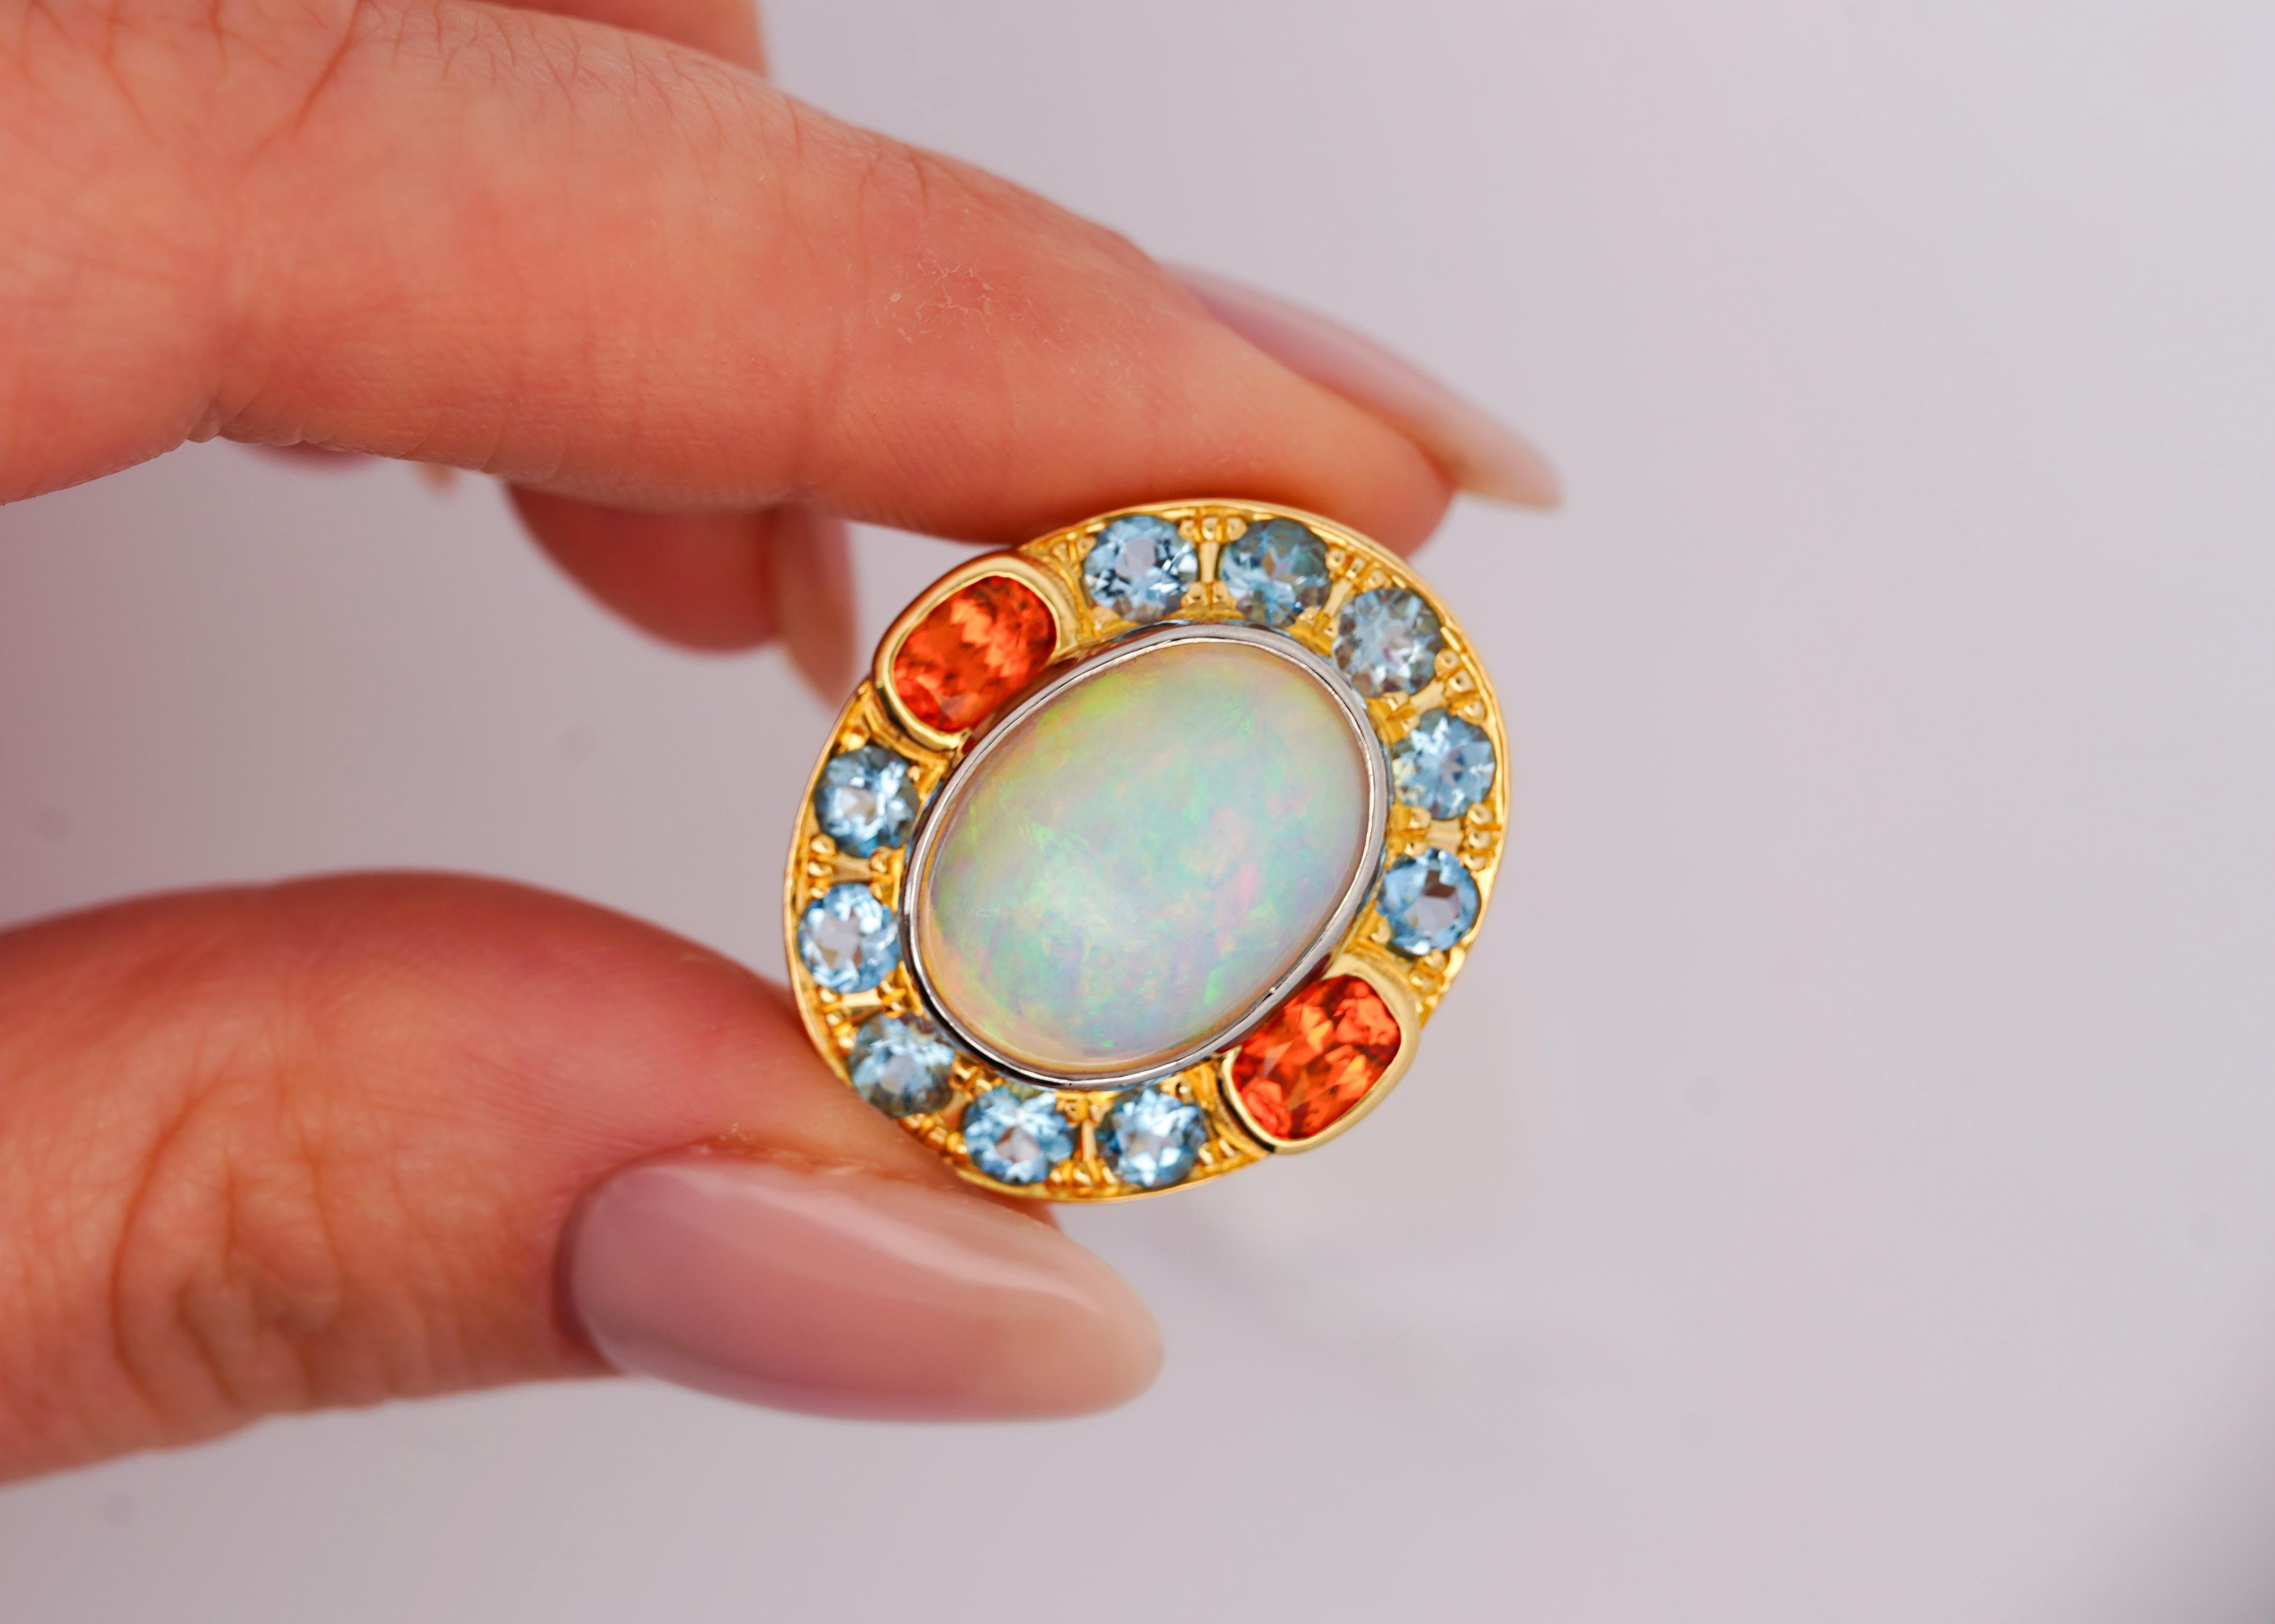 Natural 8 Carat White Opal with Orange Garnet and Aquamarine Ring.

This cocktail ring features an array of colored stones. The center features a bezel set 8 carat cabochon-cut white translucent opal with GIA certification. The opal is paired with a